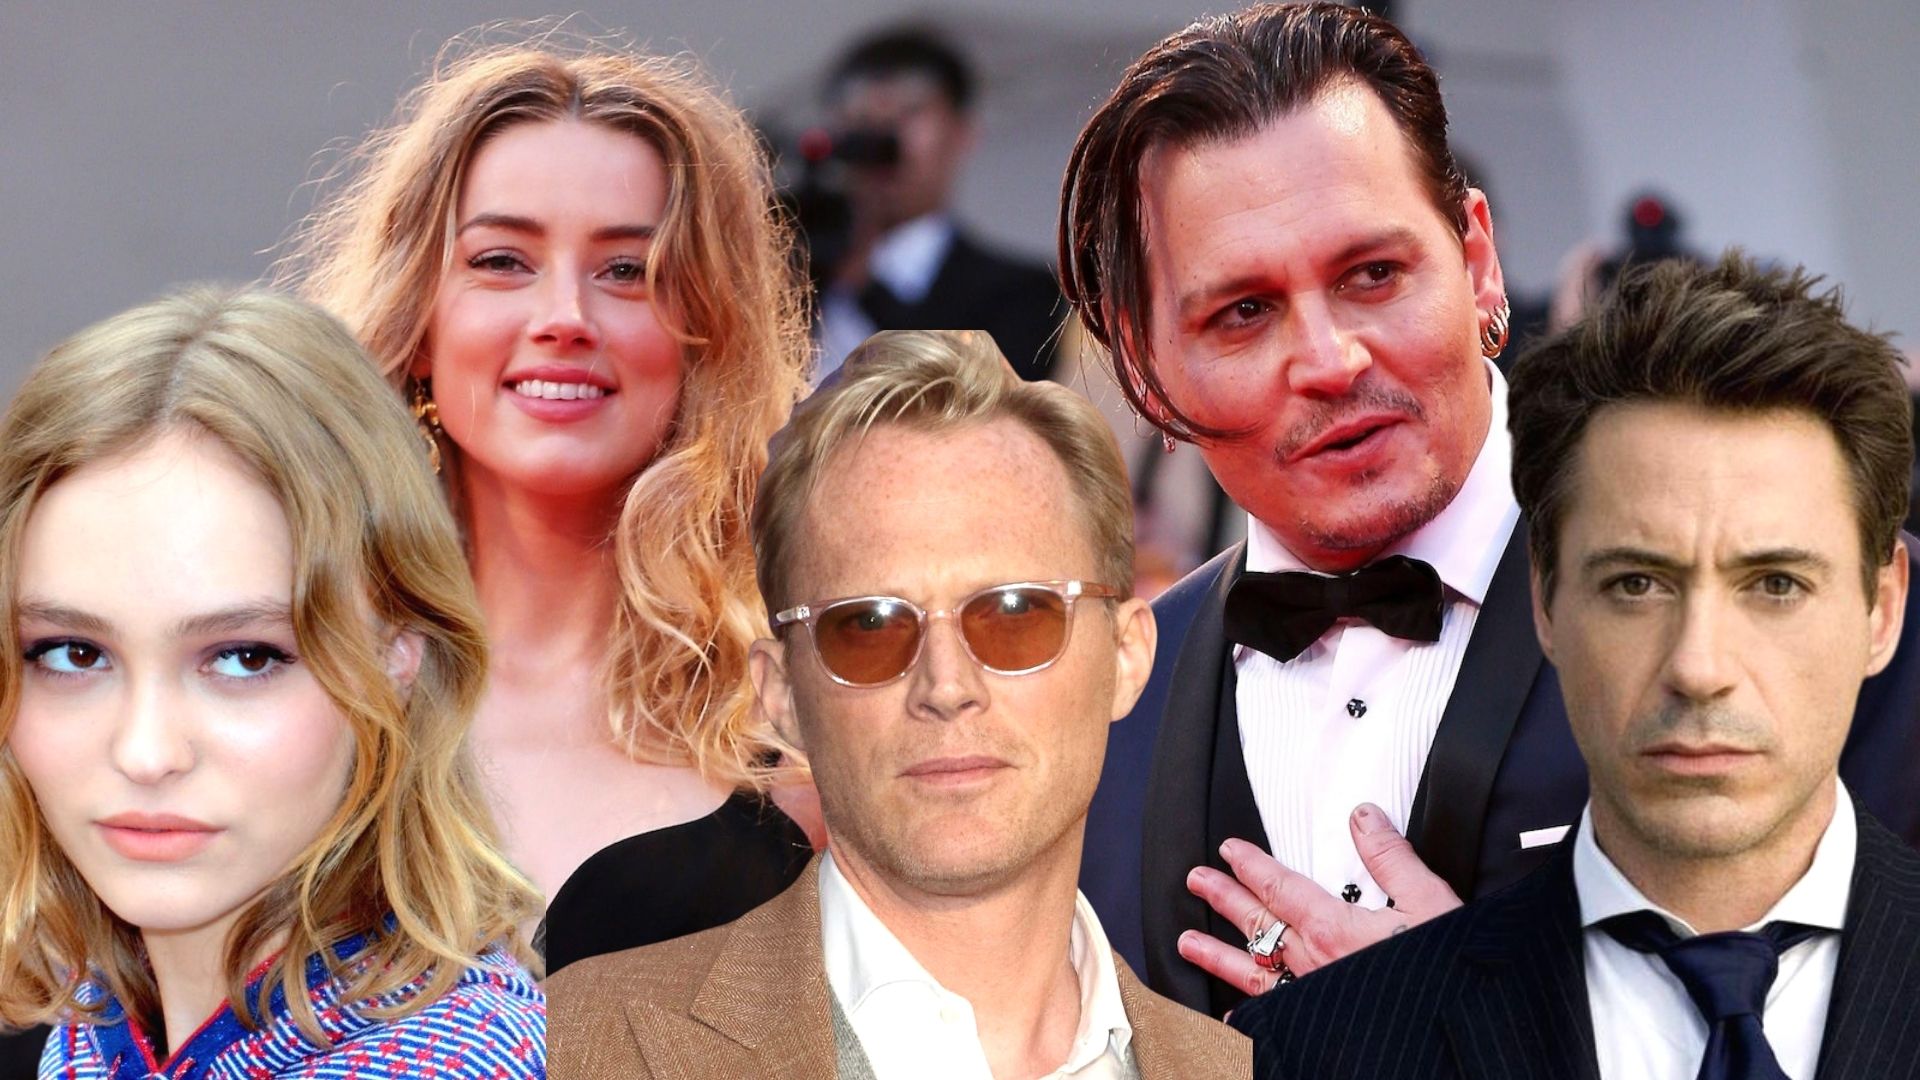 Johnny Depp And Amber Heard Controversy